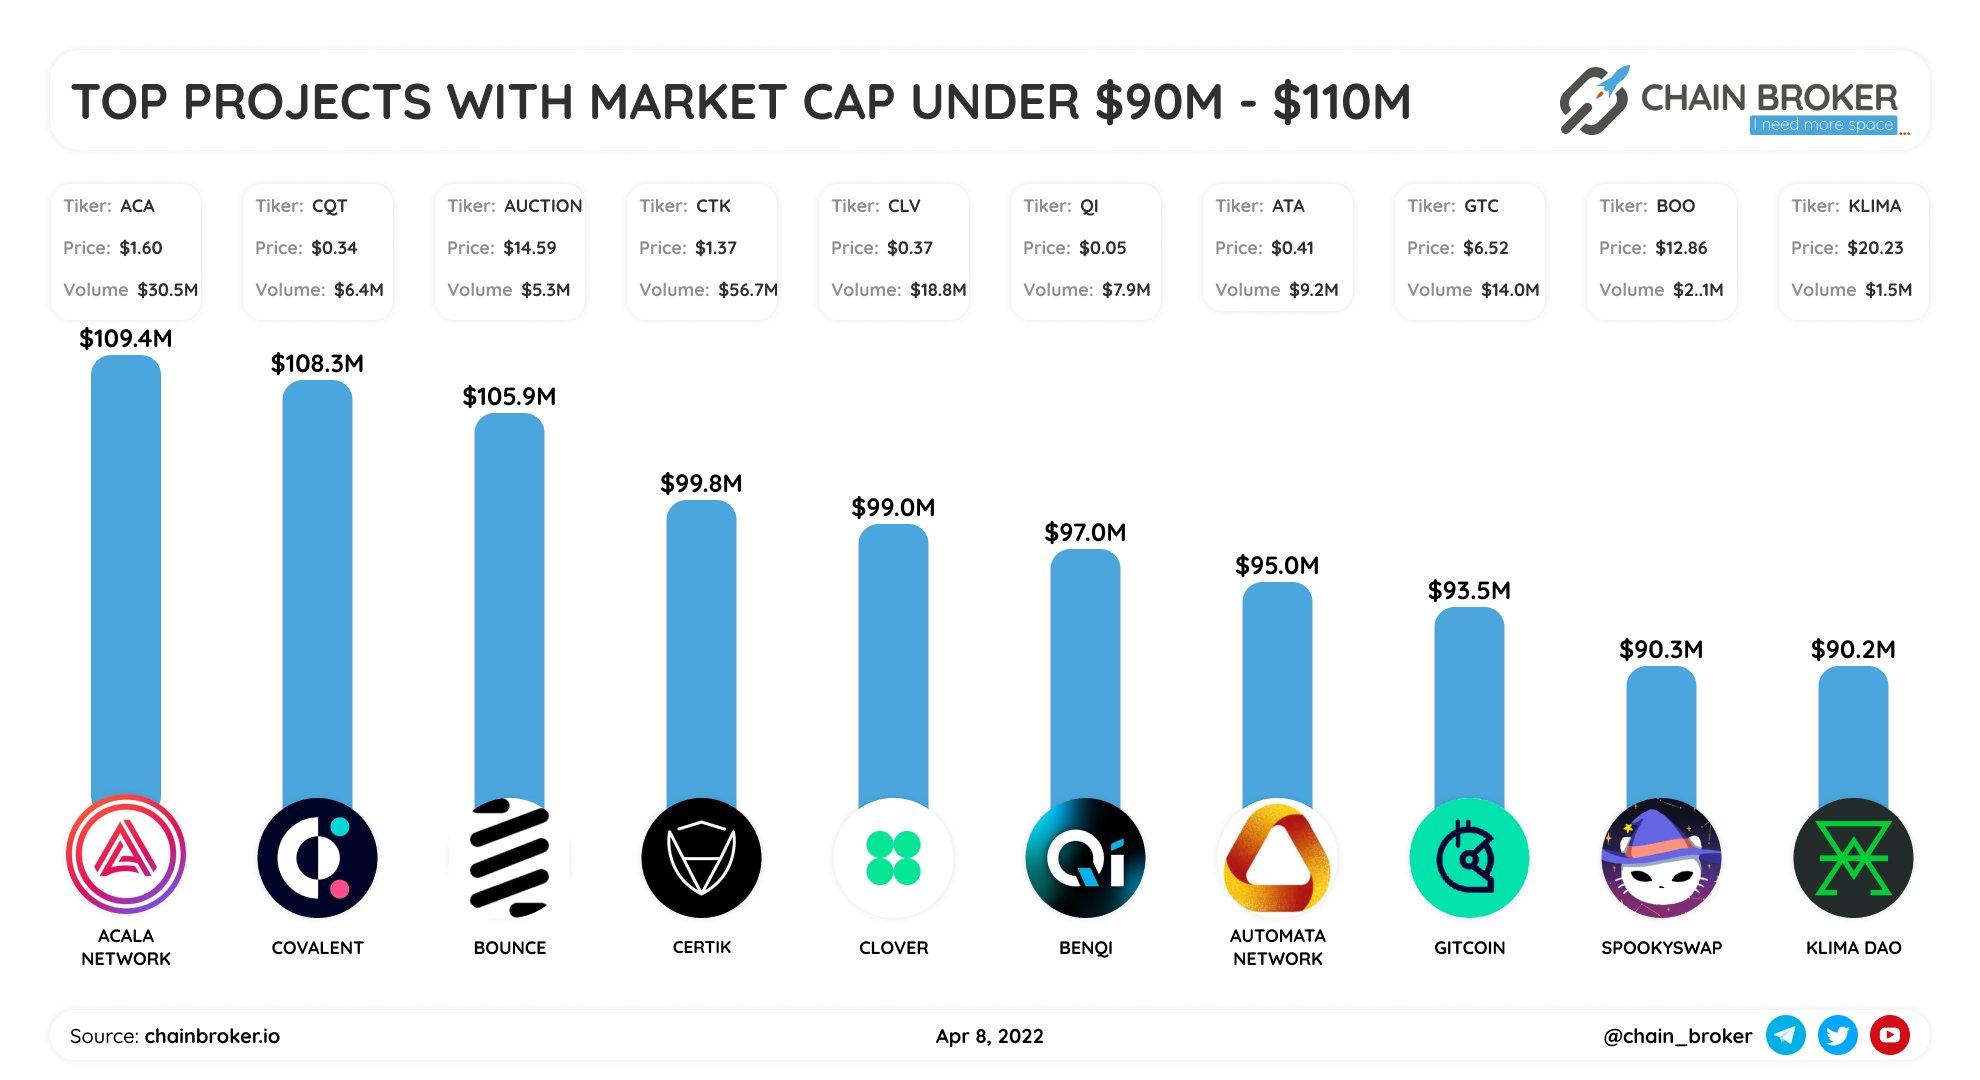 Top projects with market cap $90M - $110M